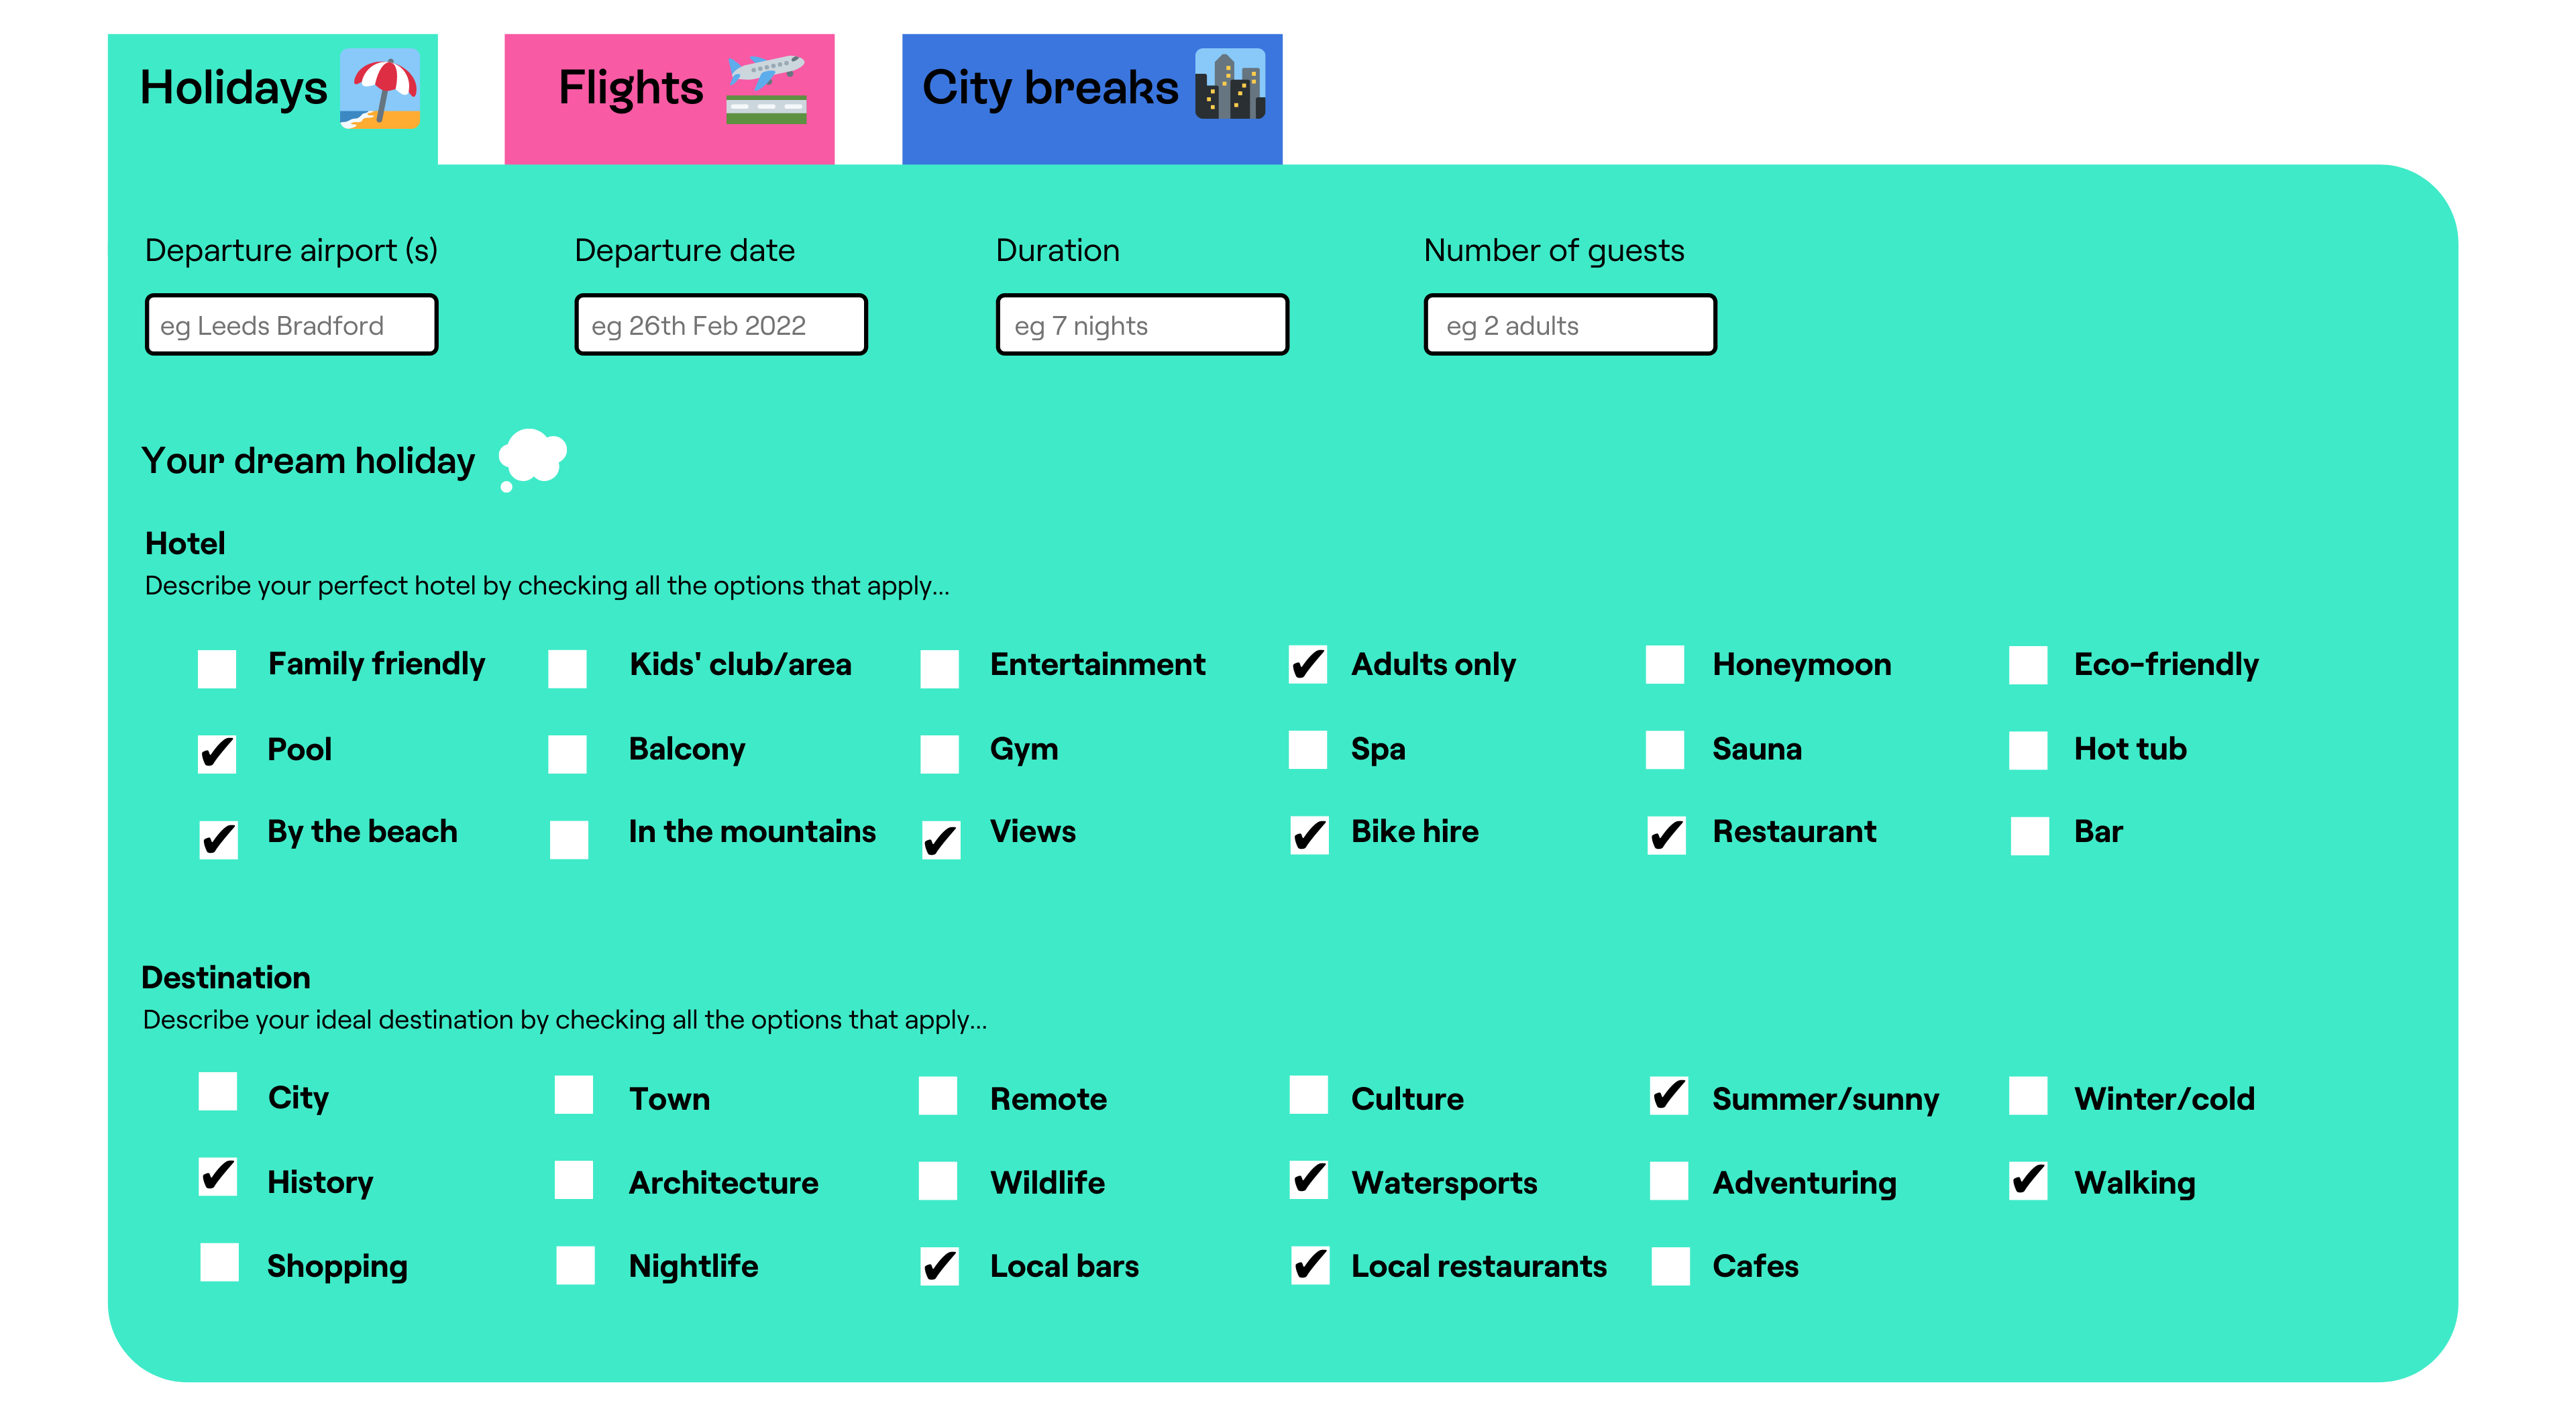 Illustration representing a reimagined holiday search function for airlines, leisure travel companies and tour operators.